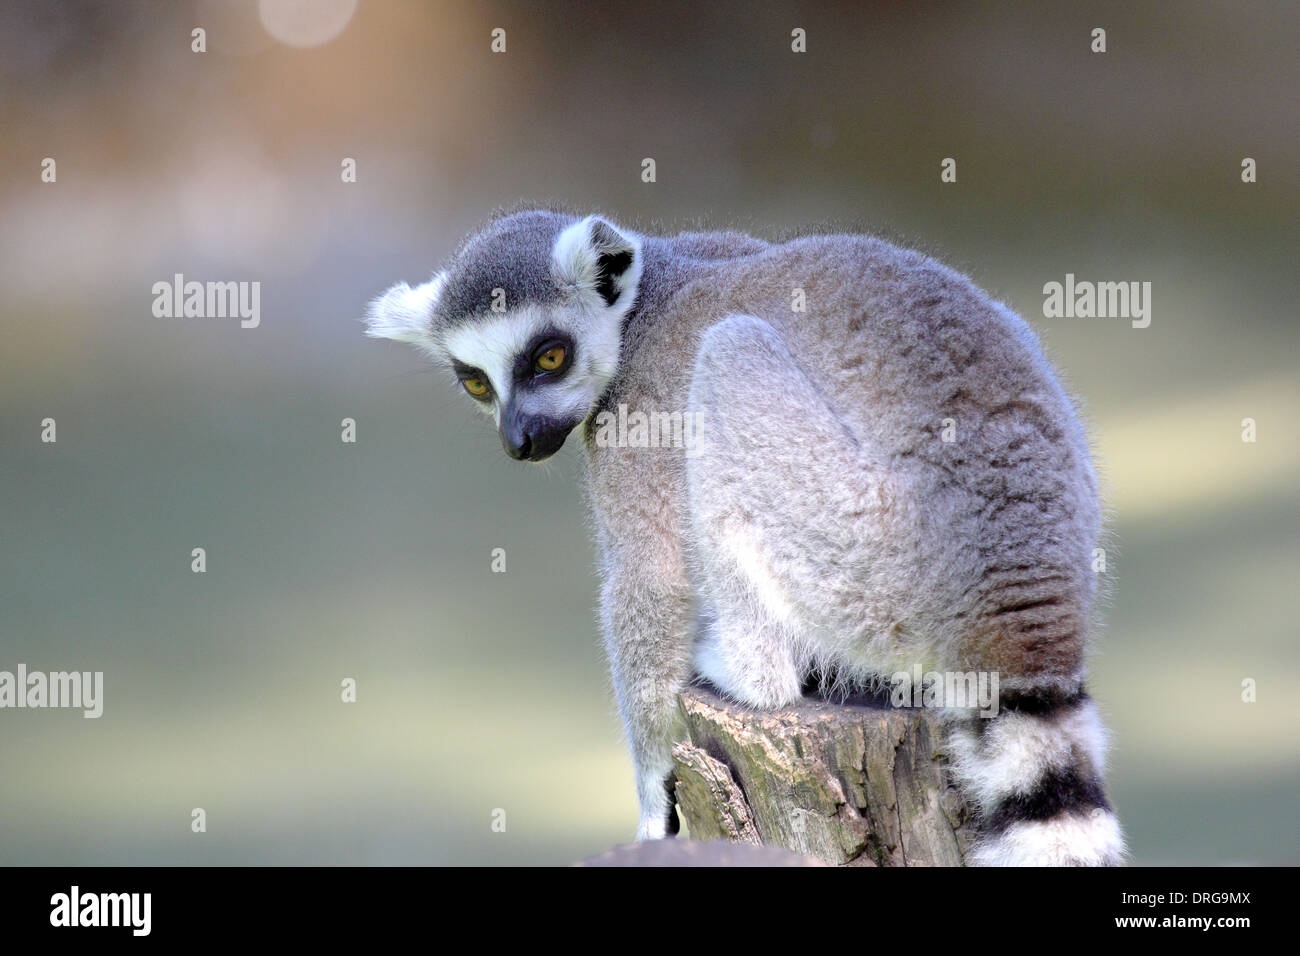 A ring-tailed lemur (Lemur catta) sitting on a log and looking behind Stock Photo